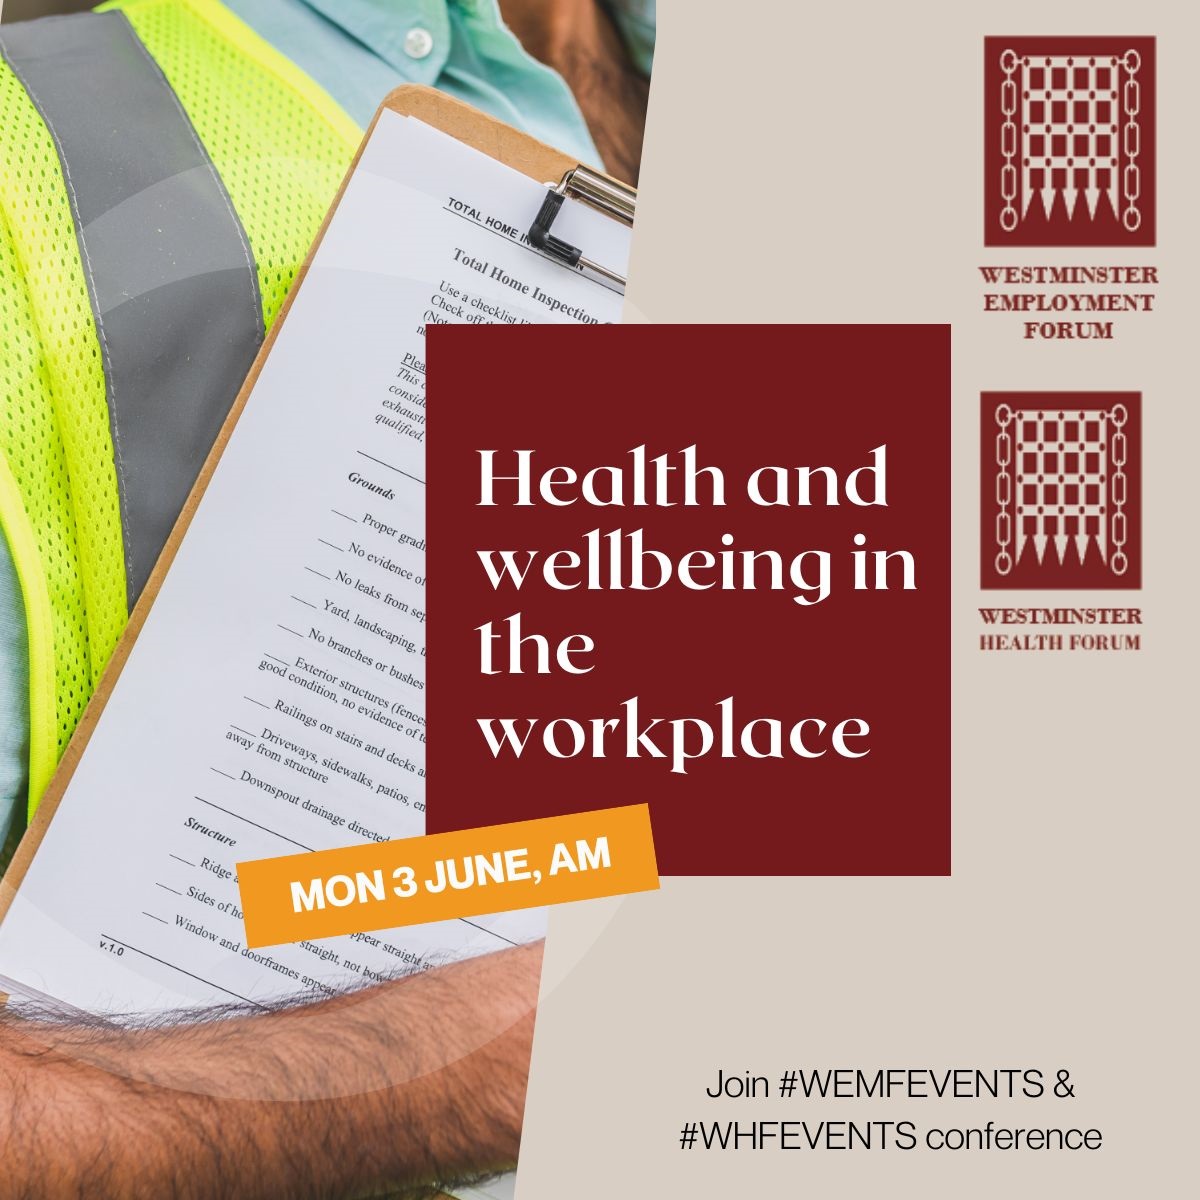 Come and join the conversation on the 3rd June for a conference on Health and wellbeing in the workplace with Westminster Employment Forum. Speakers include @DWPgovuk @EmploymtStudies @MindCharity @BritishInsurers Find out more: westminsterforumprojects.co.uk/conference/Wor…